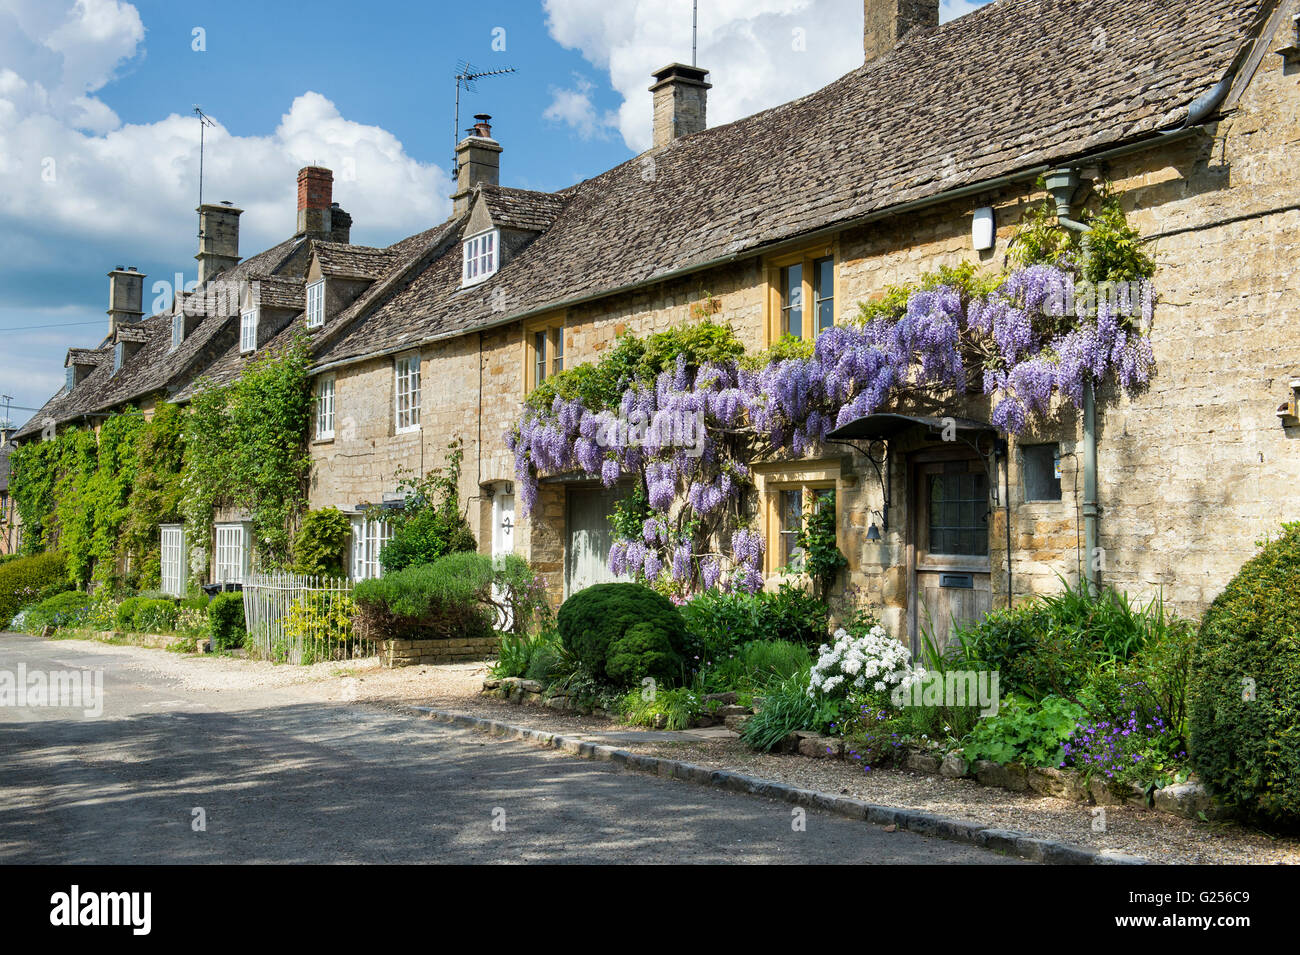 Wisteria on a cottage in Bledington, Cotswolds, Gloucestershire, England Stock Photo